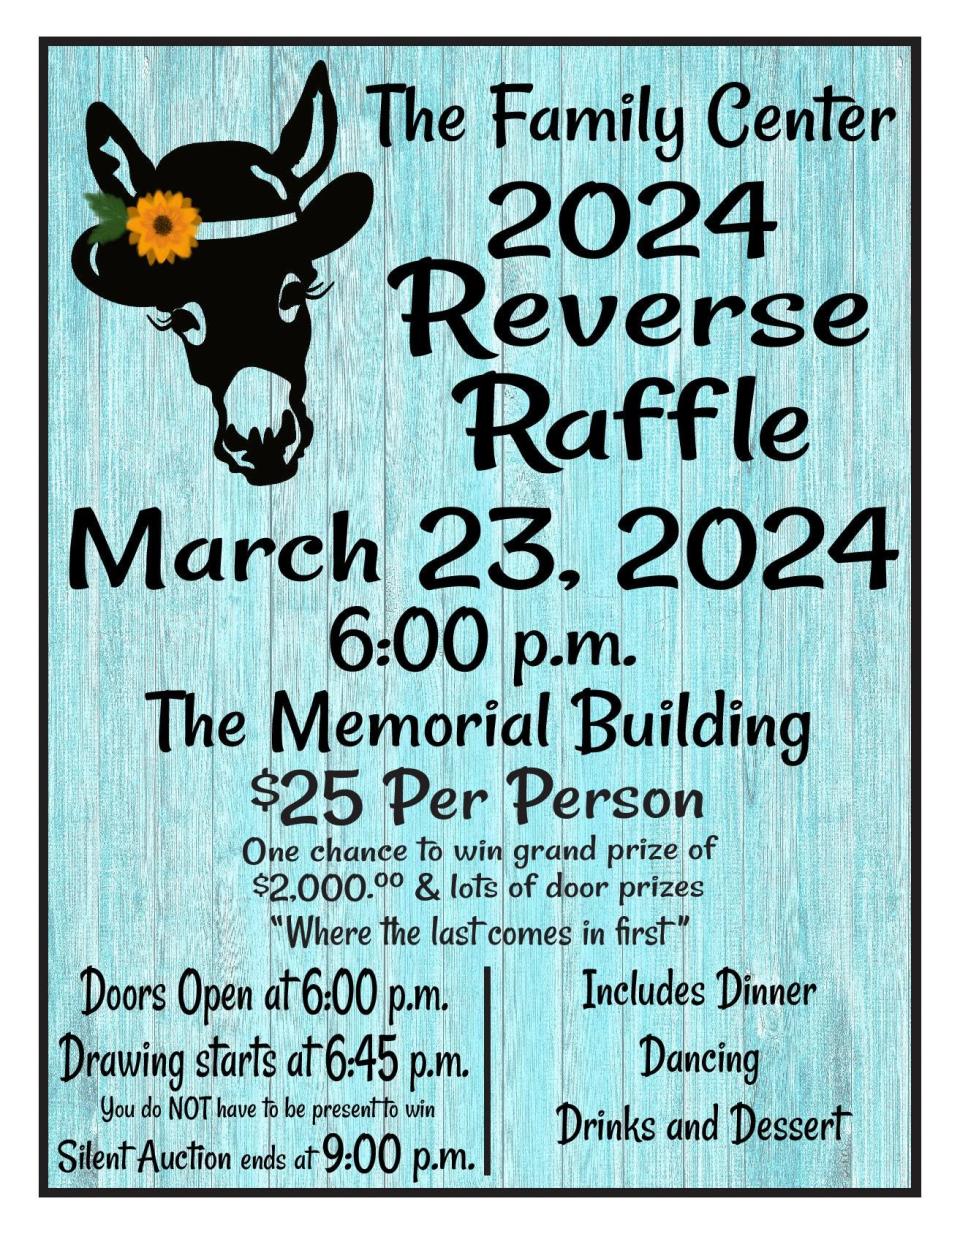 The Family Center will host its 2024 Reverse Raffle starting at 6 p.m. Saturday at The Memorial Building.